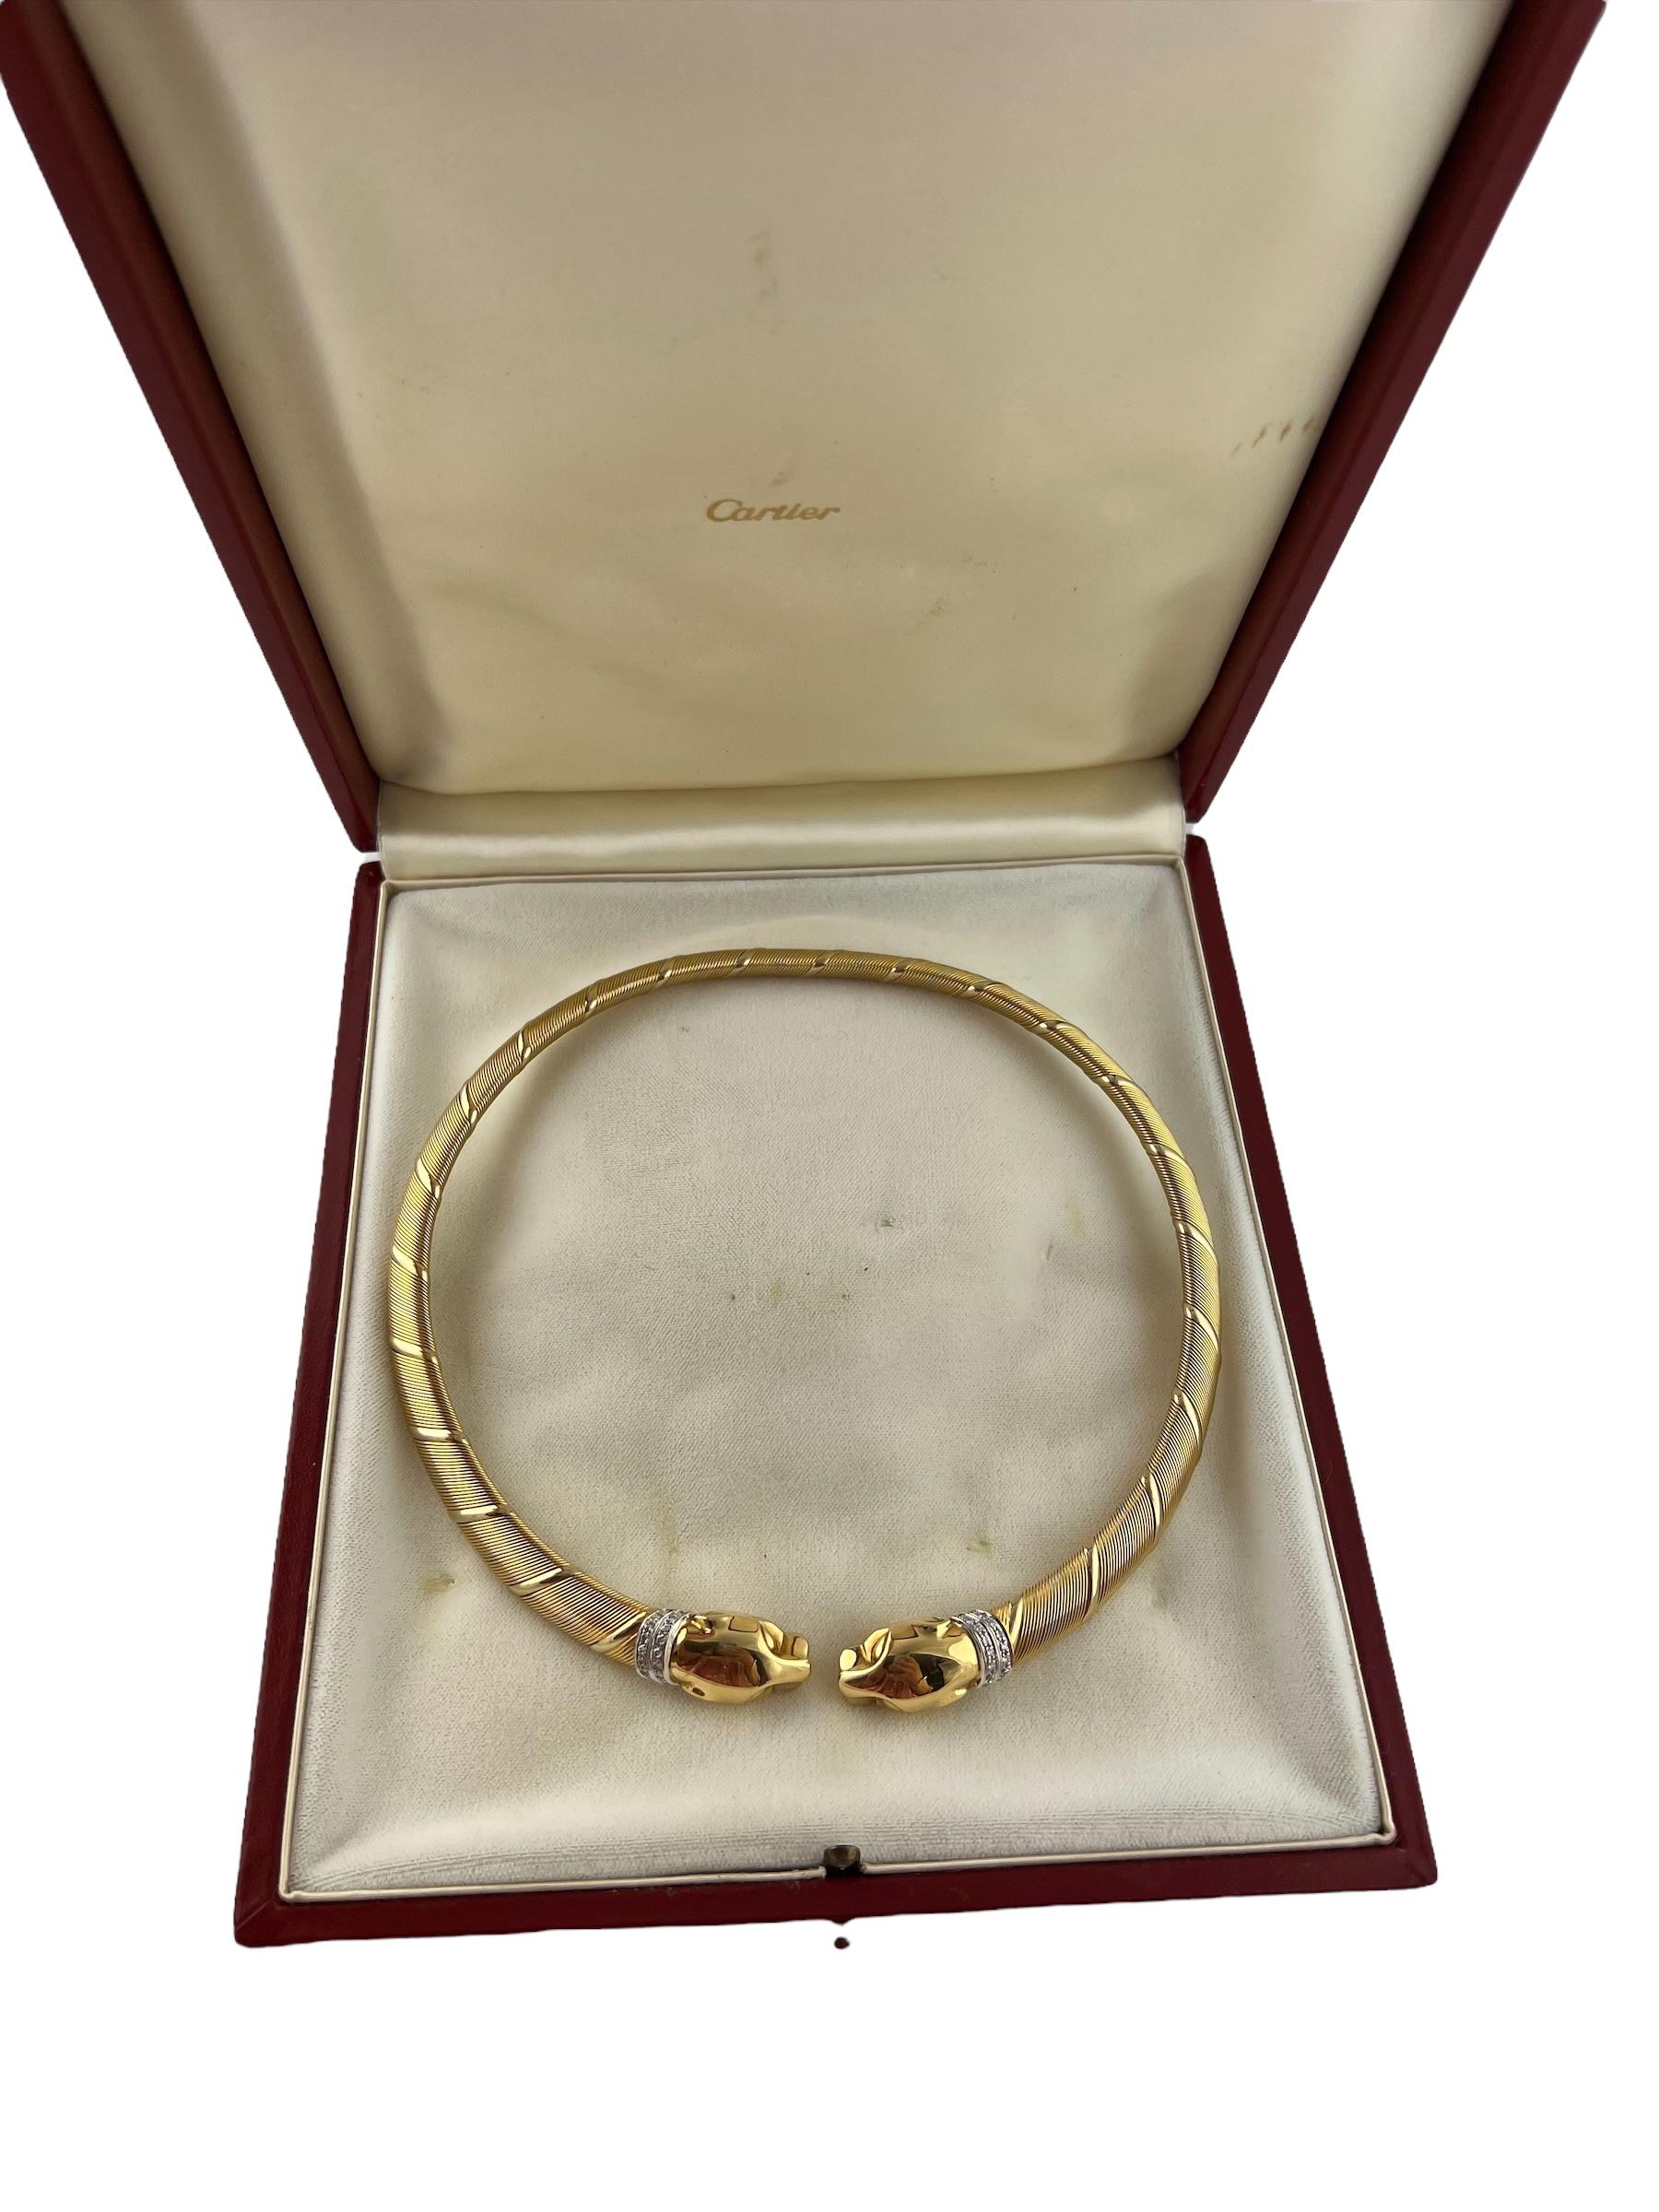 1996, Cartier 18K Tri Color Gold Diamond Panther Choker Necklace Box / Papers 5